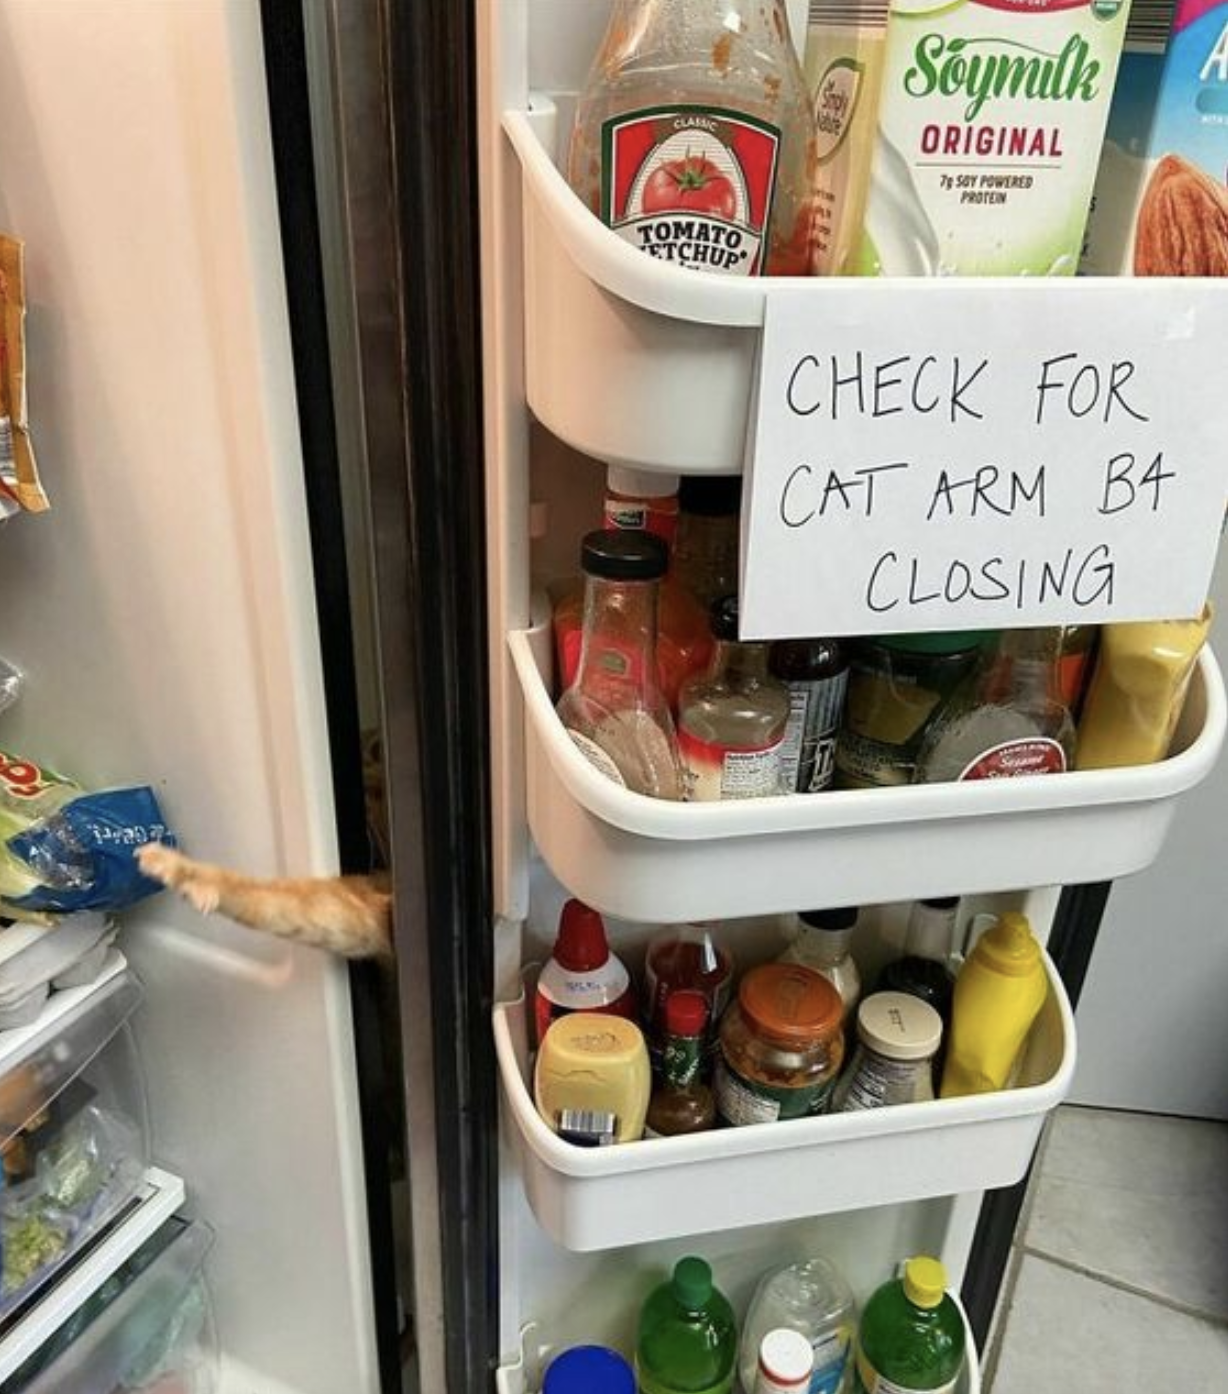 open fridge door note says check for cat arm before closing